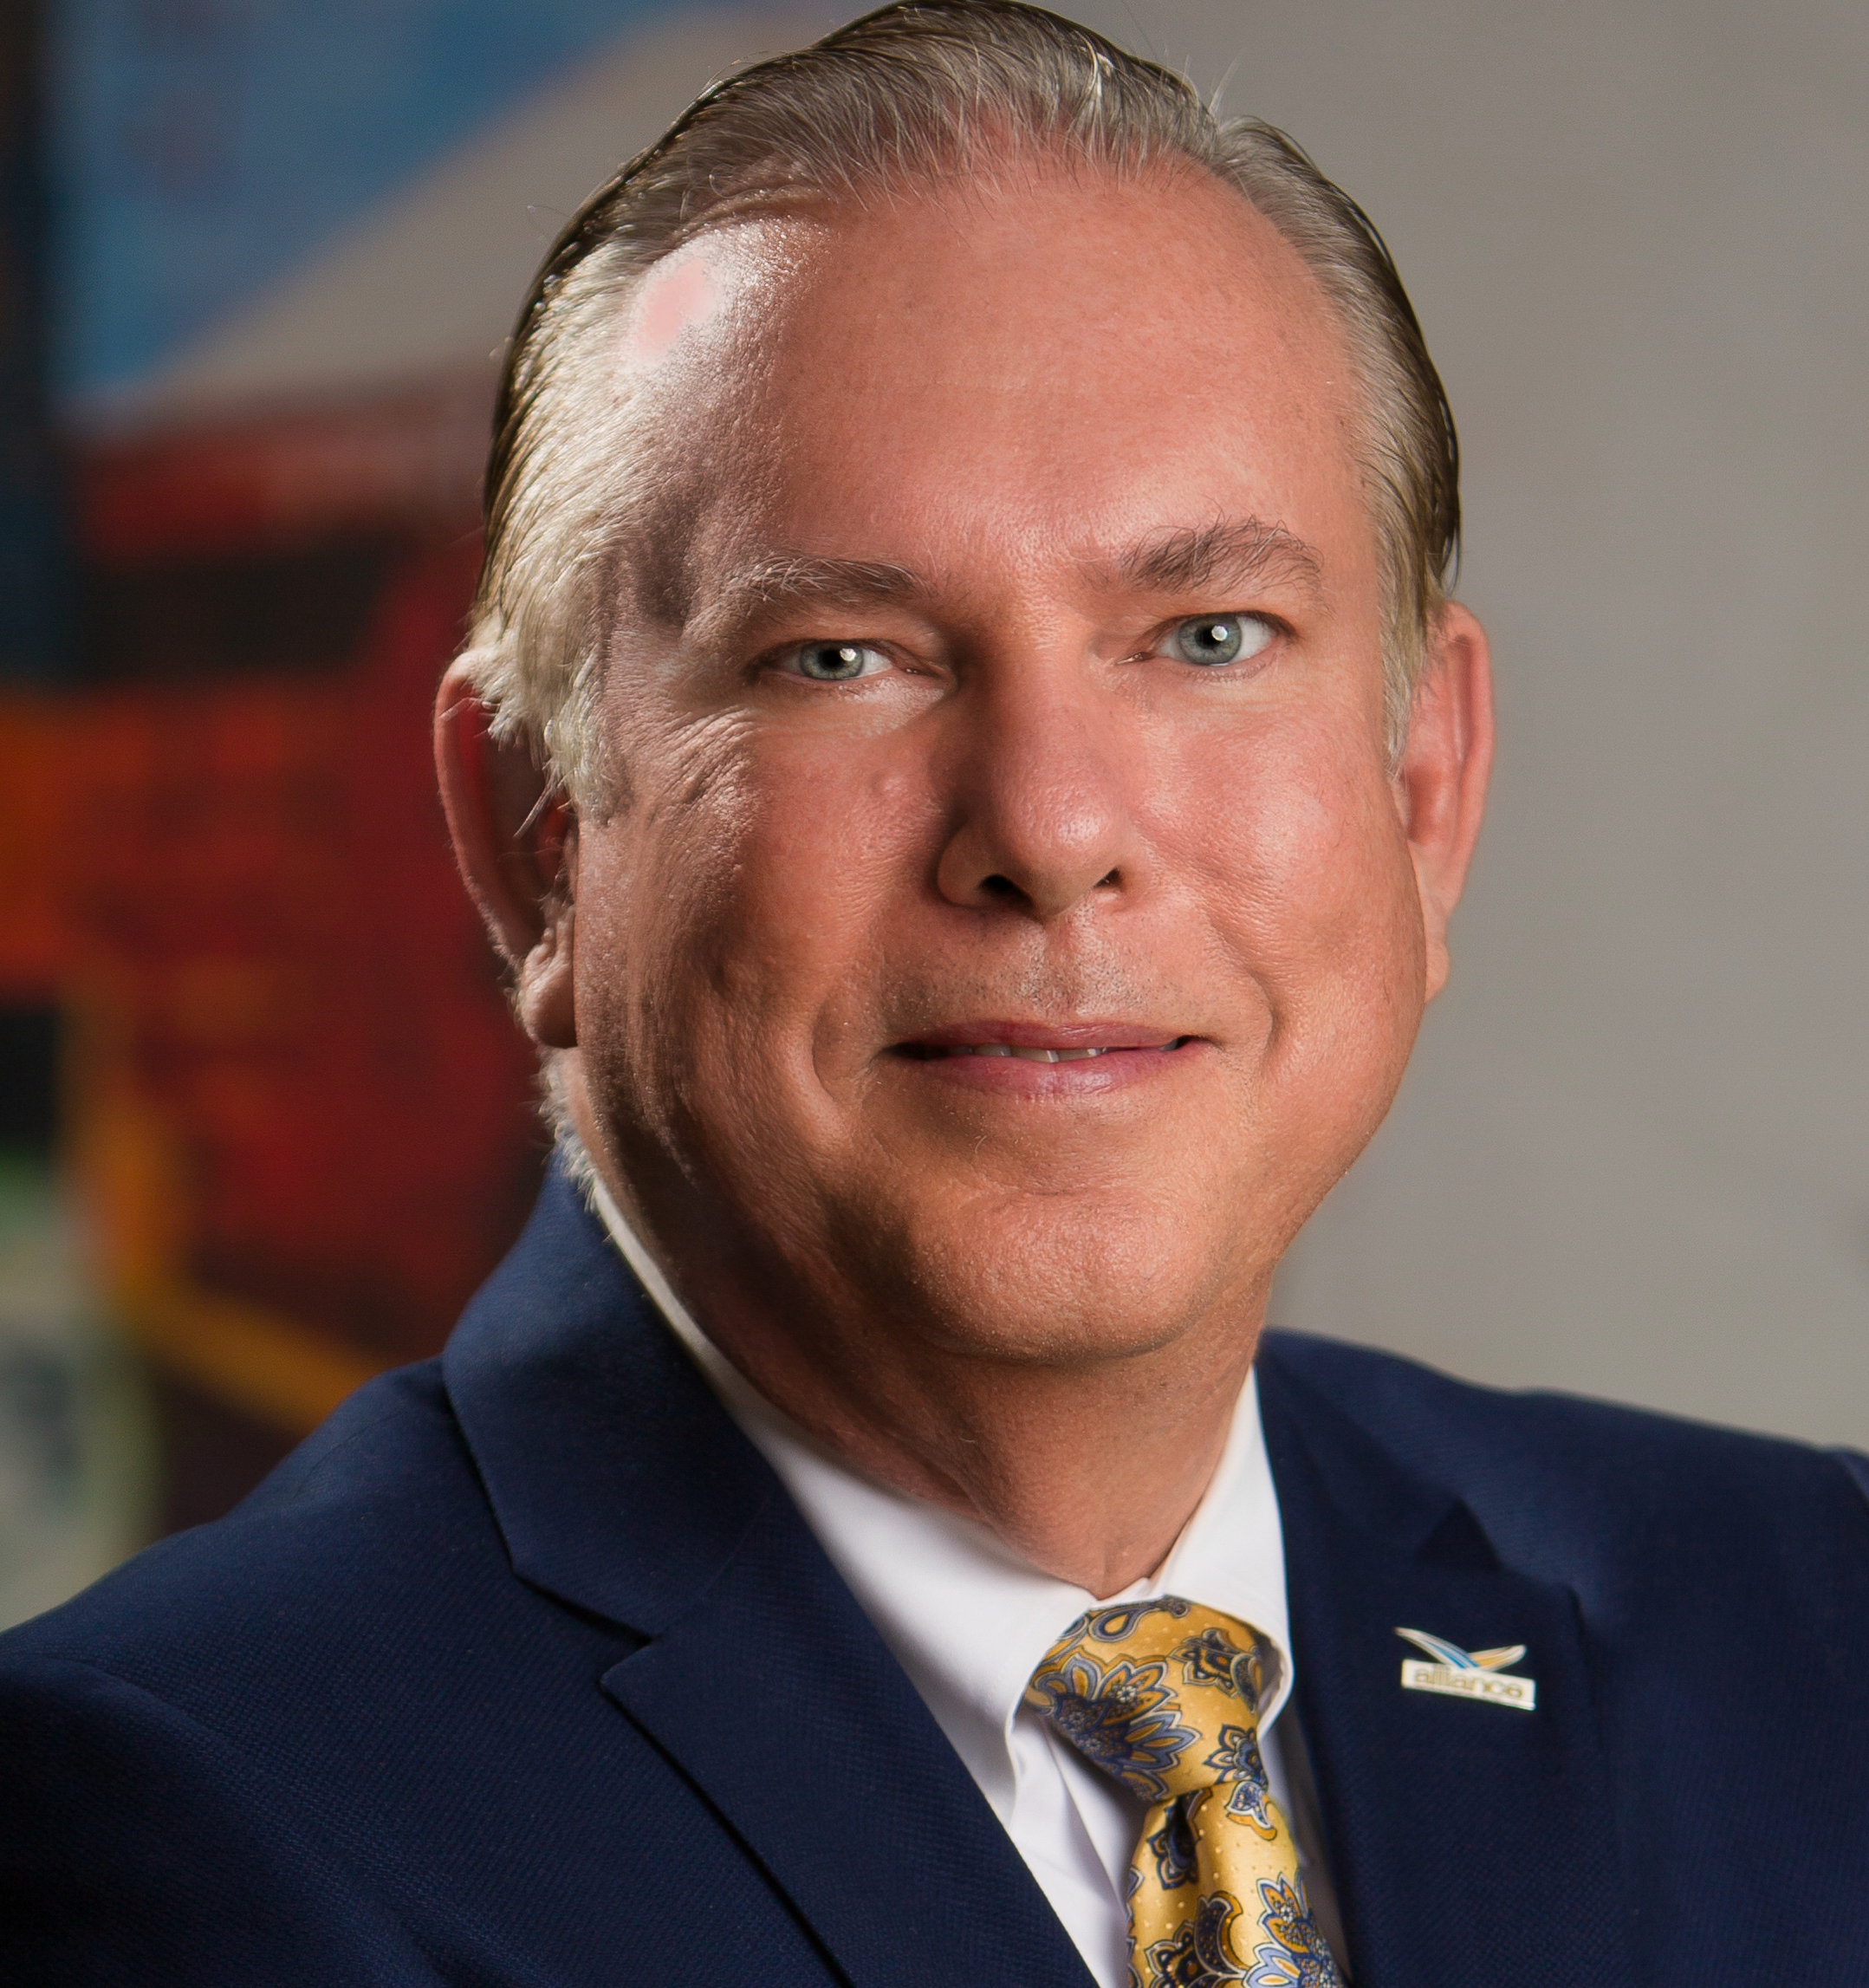 Bob Swindell, President and CEO, Greater Fort Lauderdale Alliance